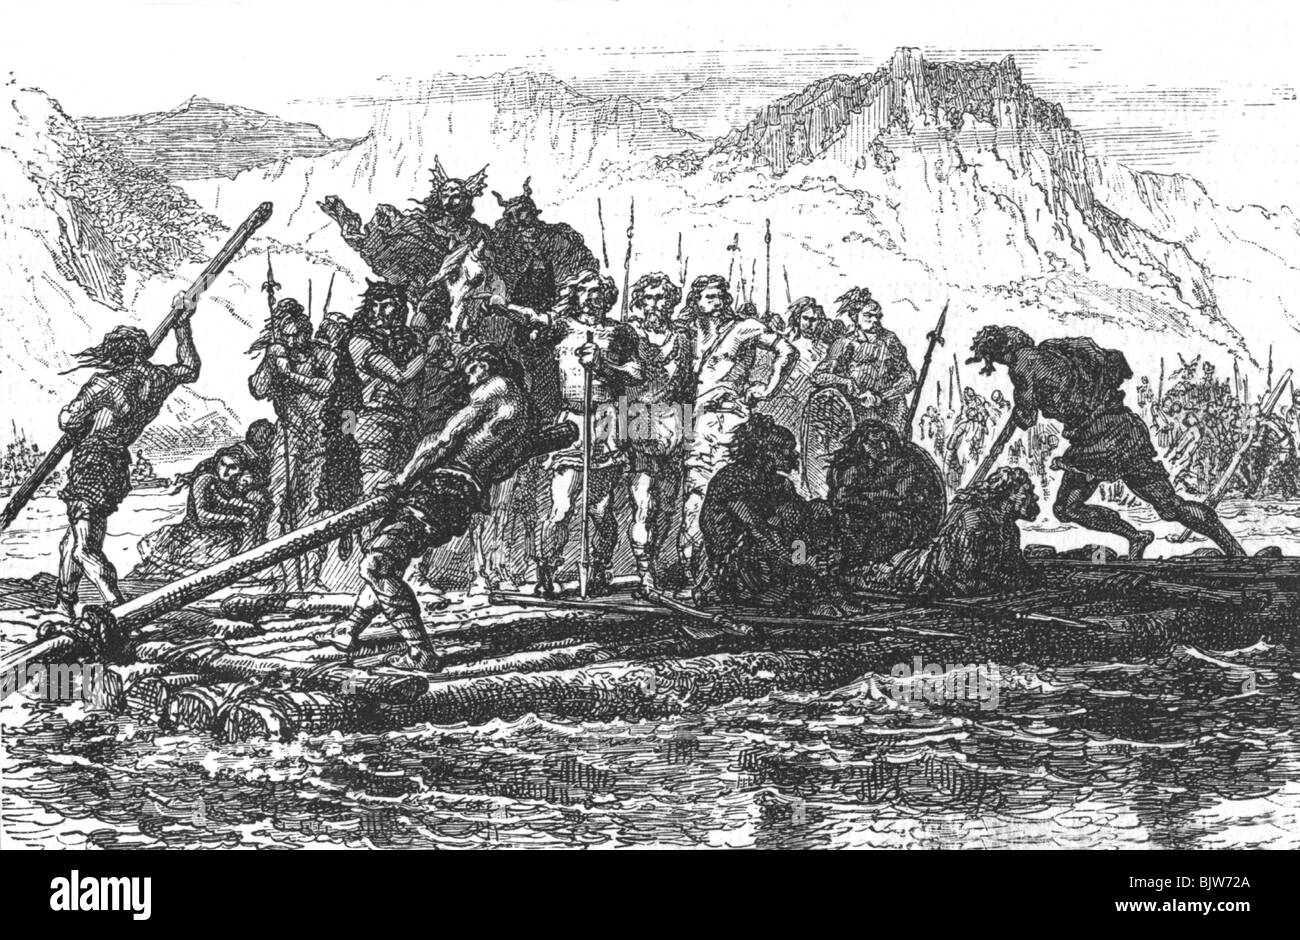 ancient world, Germanics, Germanic warriors crossing the Rhine River, wood engraving, 19th century, historic, historical, Roman Empire, float, raft, rafts, border crossing, border crossings, attack, raid, attacks, raids, invasion, invasions, Migration Period, ancient world, people, Stock Photo